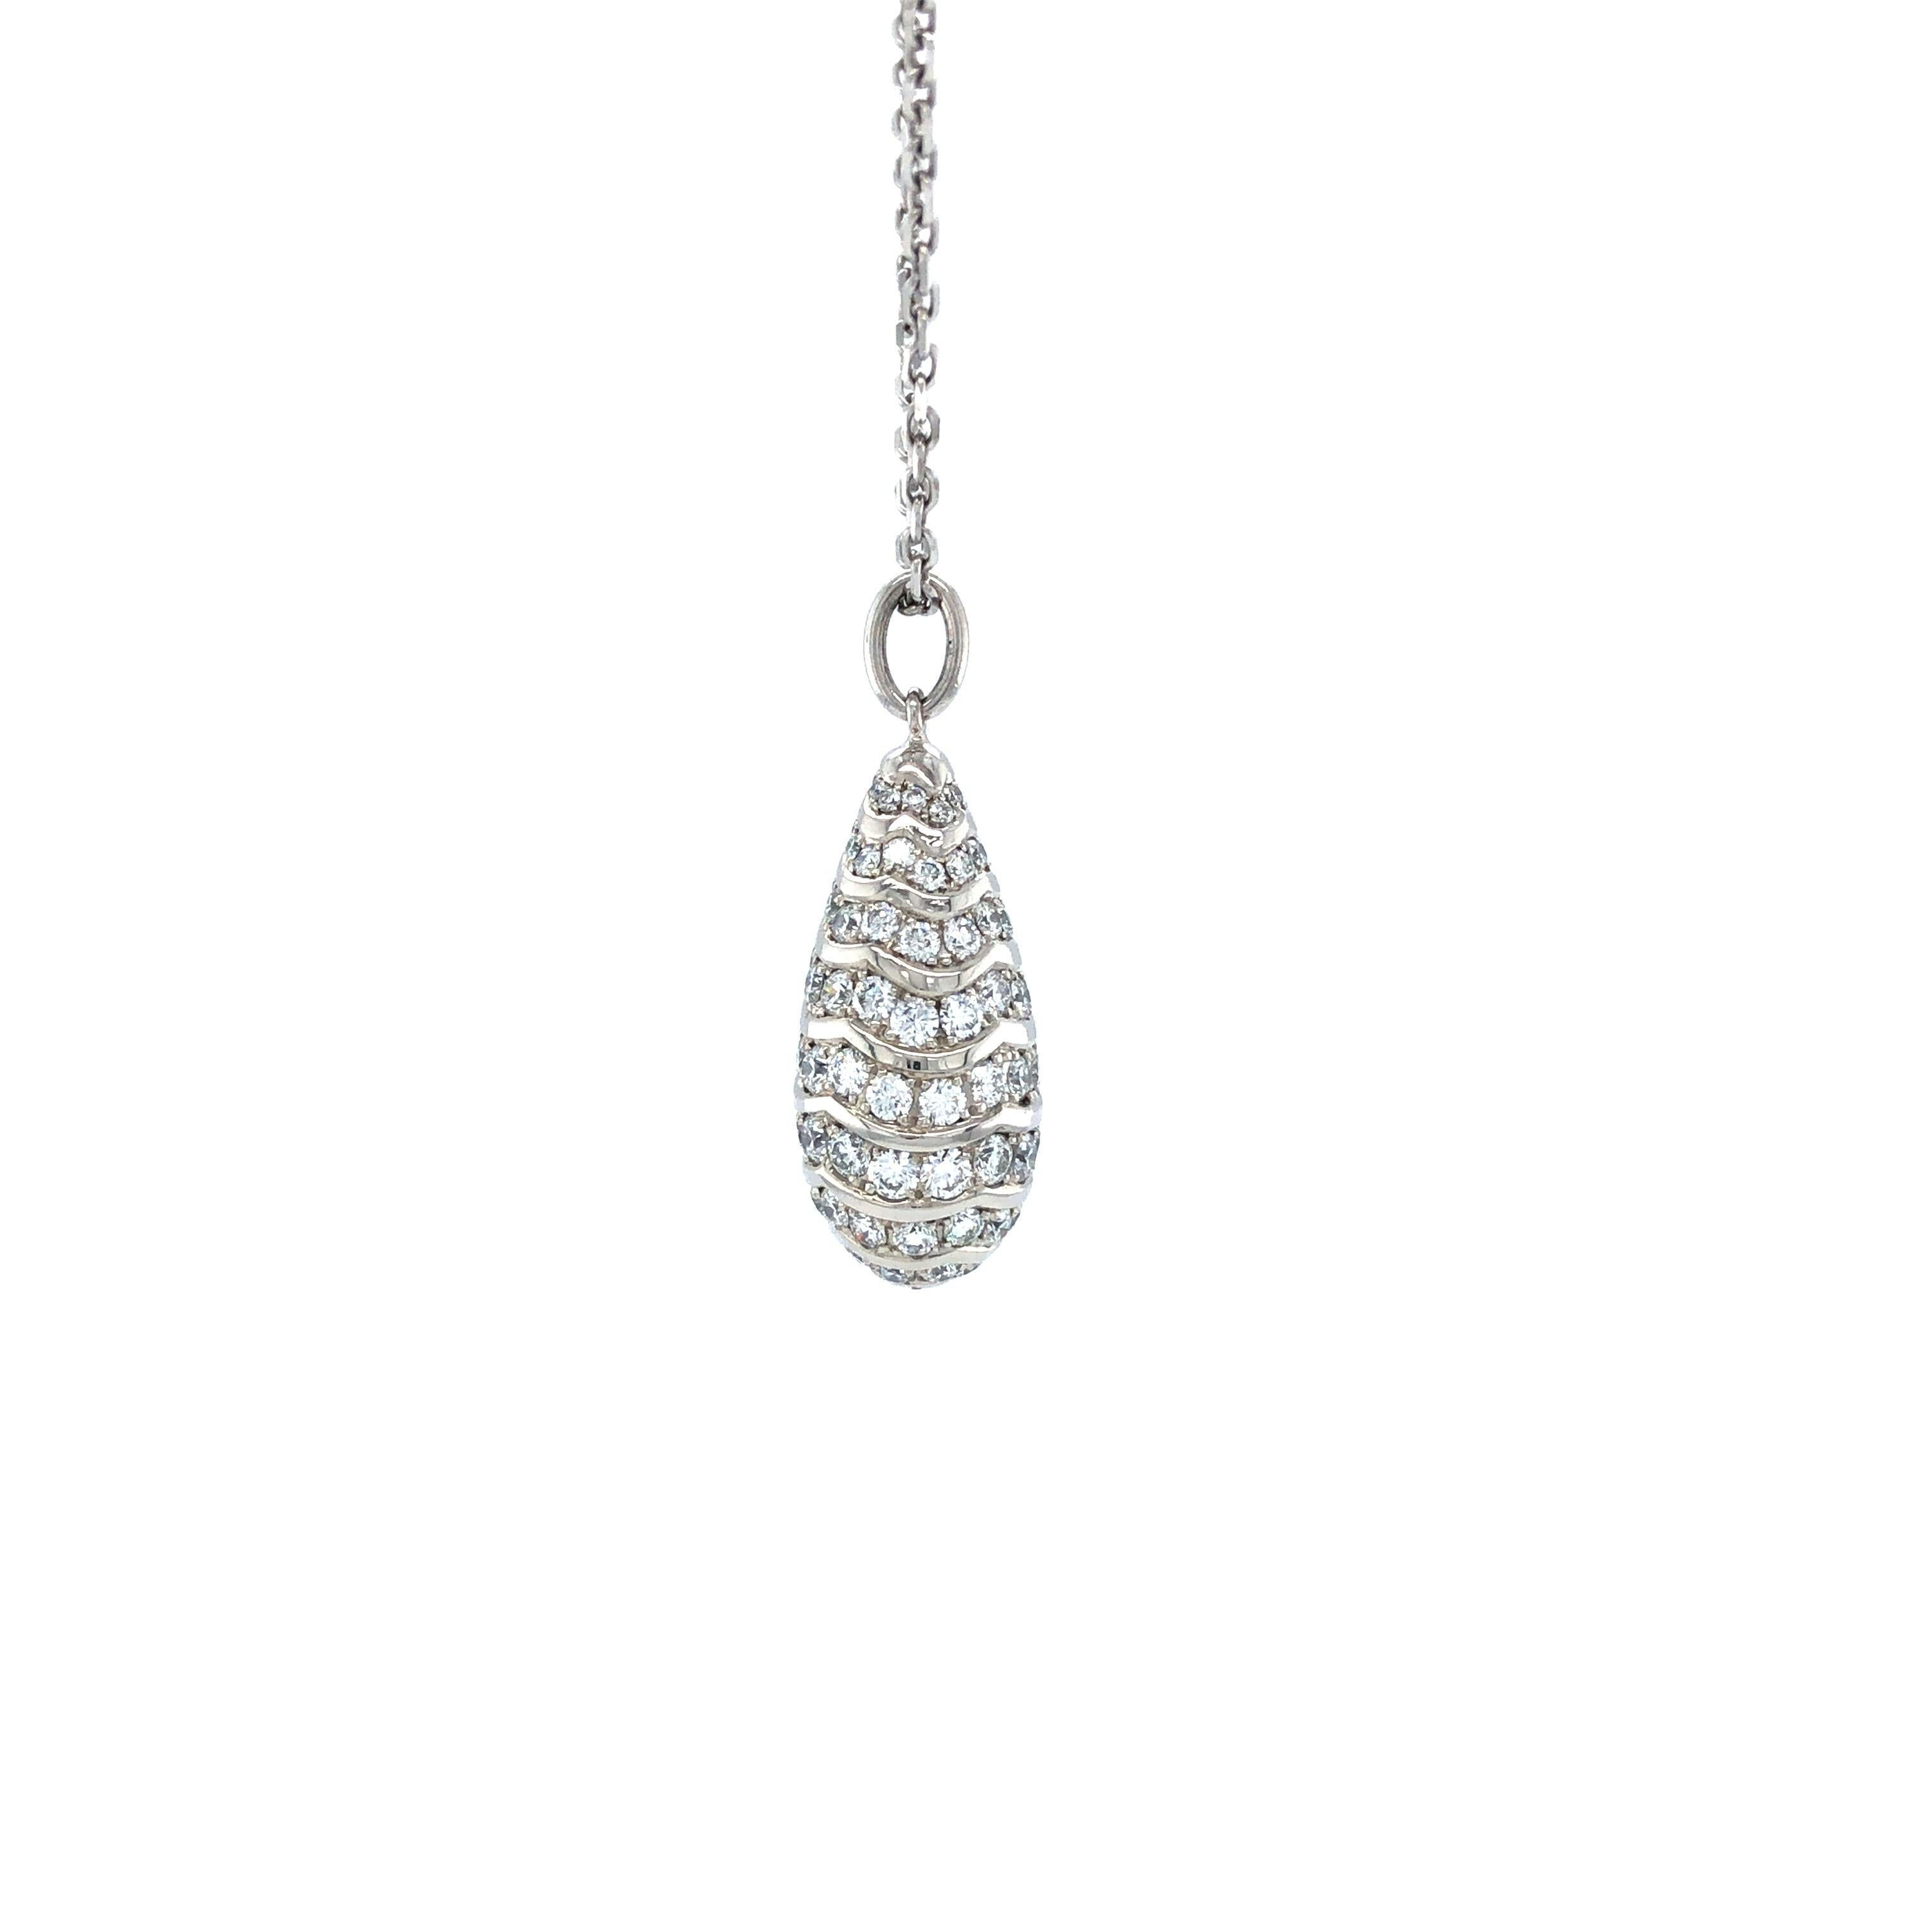 Victor Mayer drop pendant necklace, Dew Drop Collection, 18k white gold, 91 diamonds, total 1.51 ct, G VS, measurements app. 9.5 mm x 28.5 mm, limited edition of 150 pieces

About the creator Victor Mayer
Victor Mayer is internationally renowned for